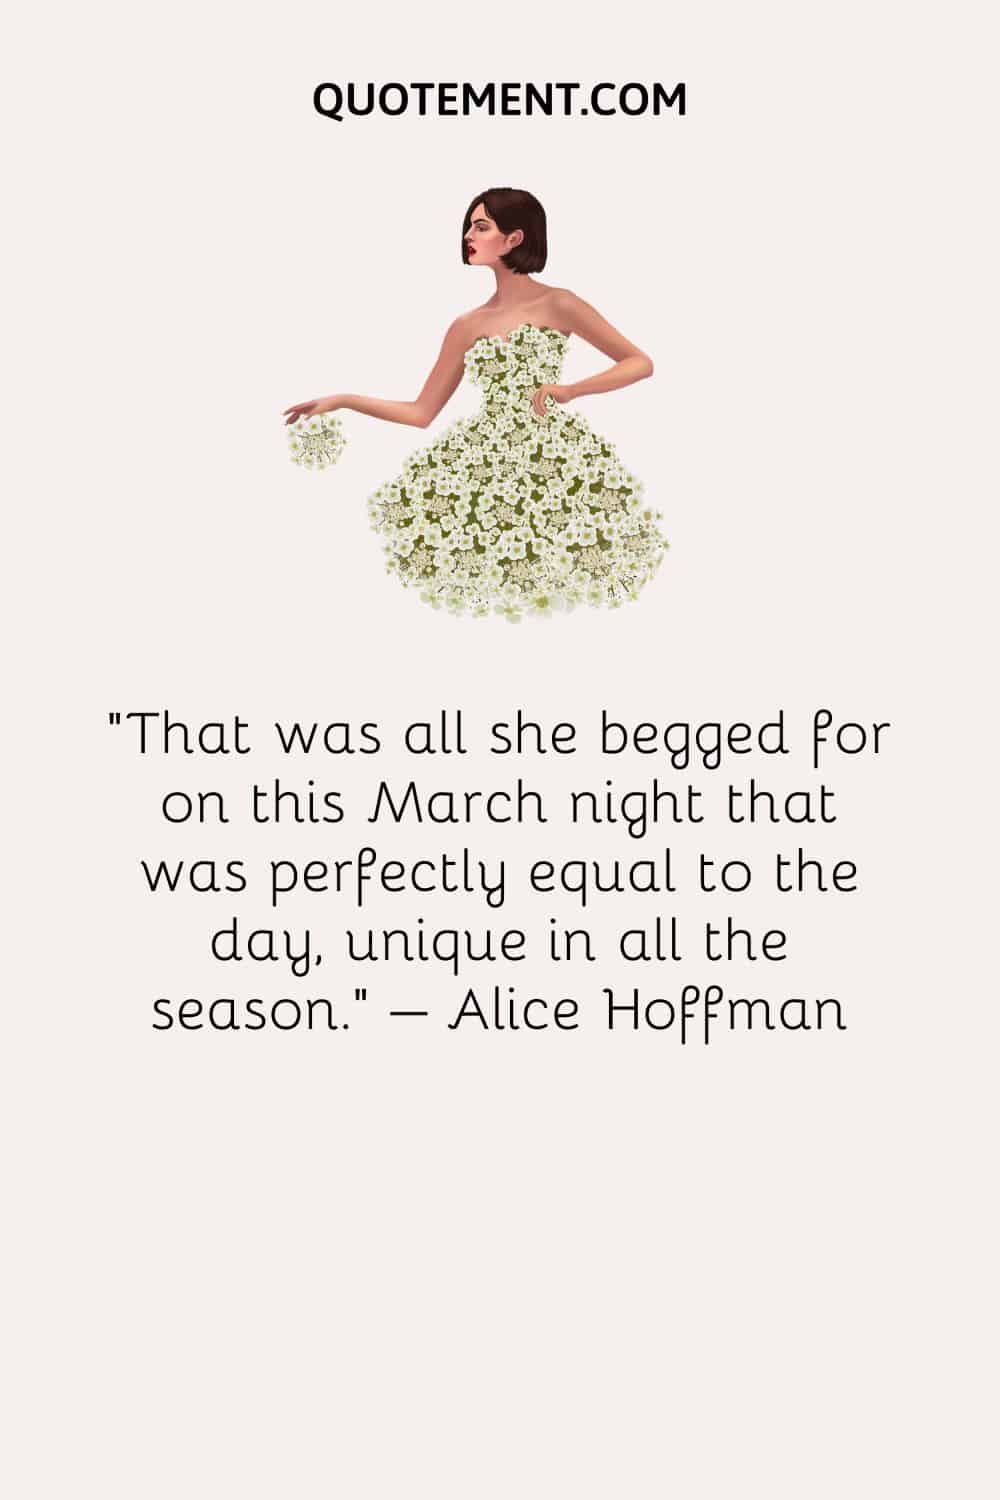 That was all she begged for on this March night that was perfectly equal to the day, unique in all the season. – Alice Hoffman